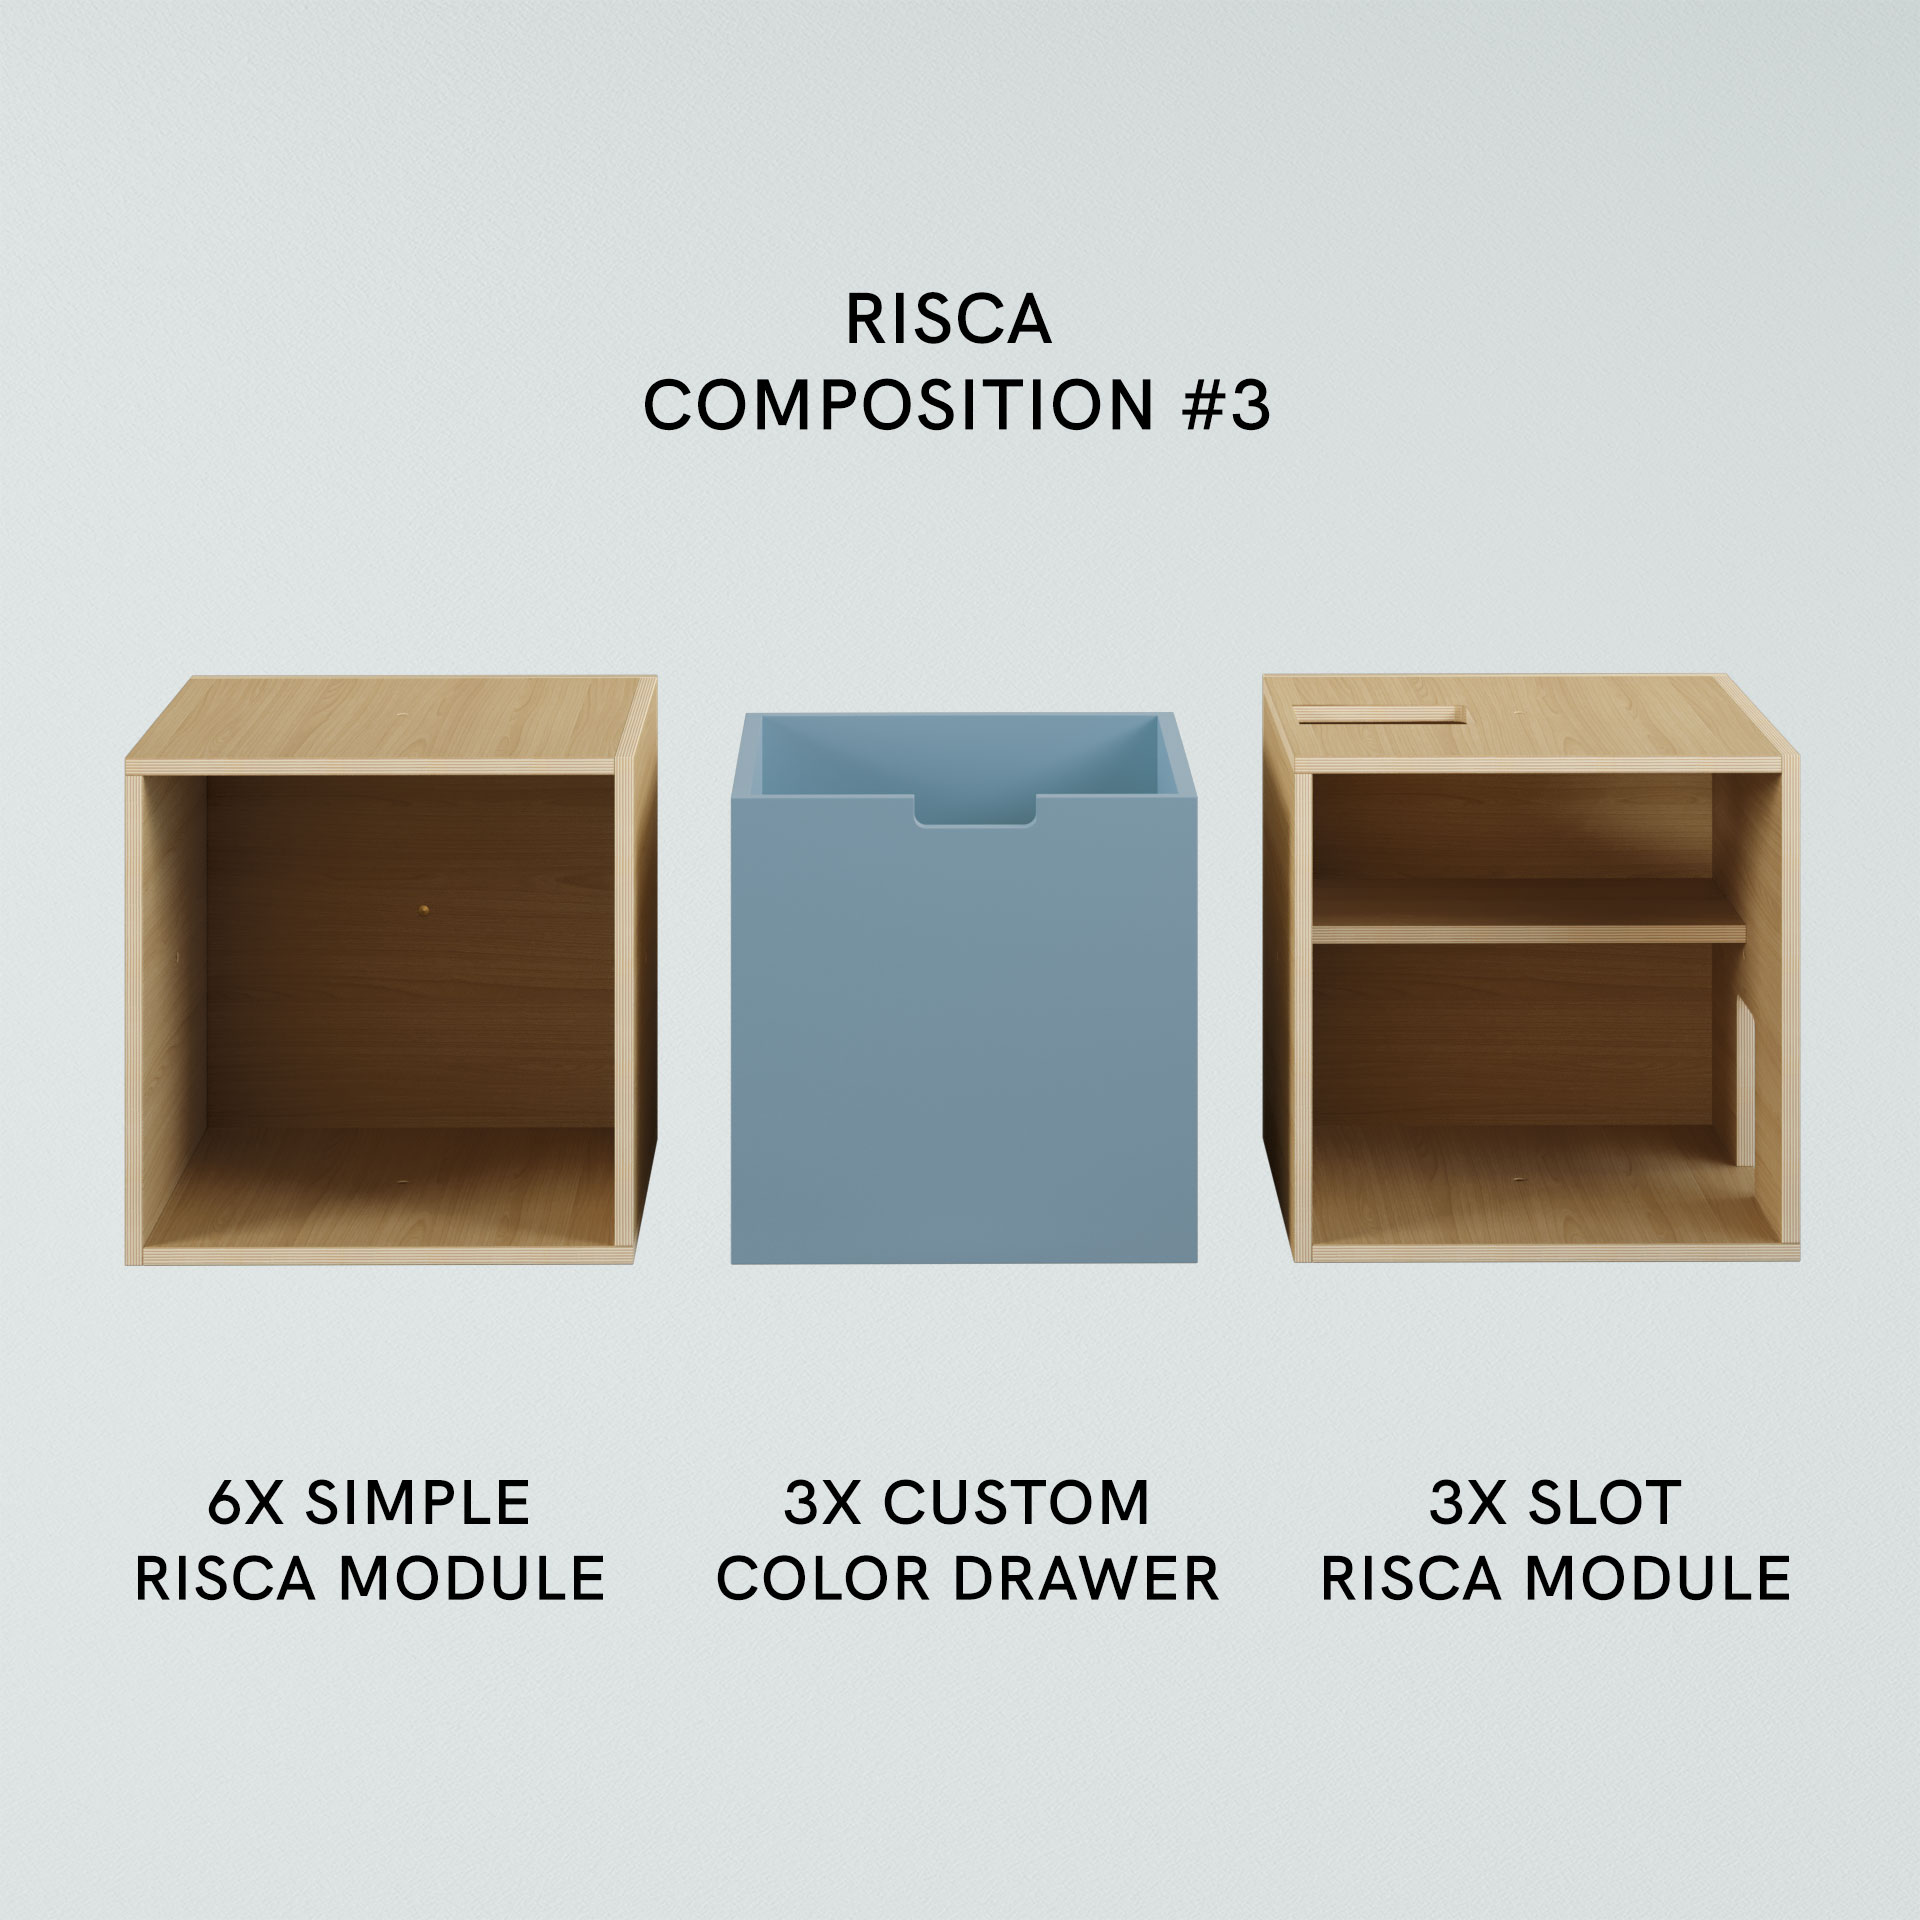 RISCA MODULE crafted from natural ash or oak veneer plywood